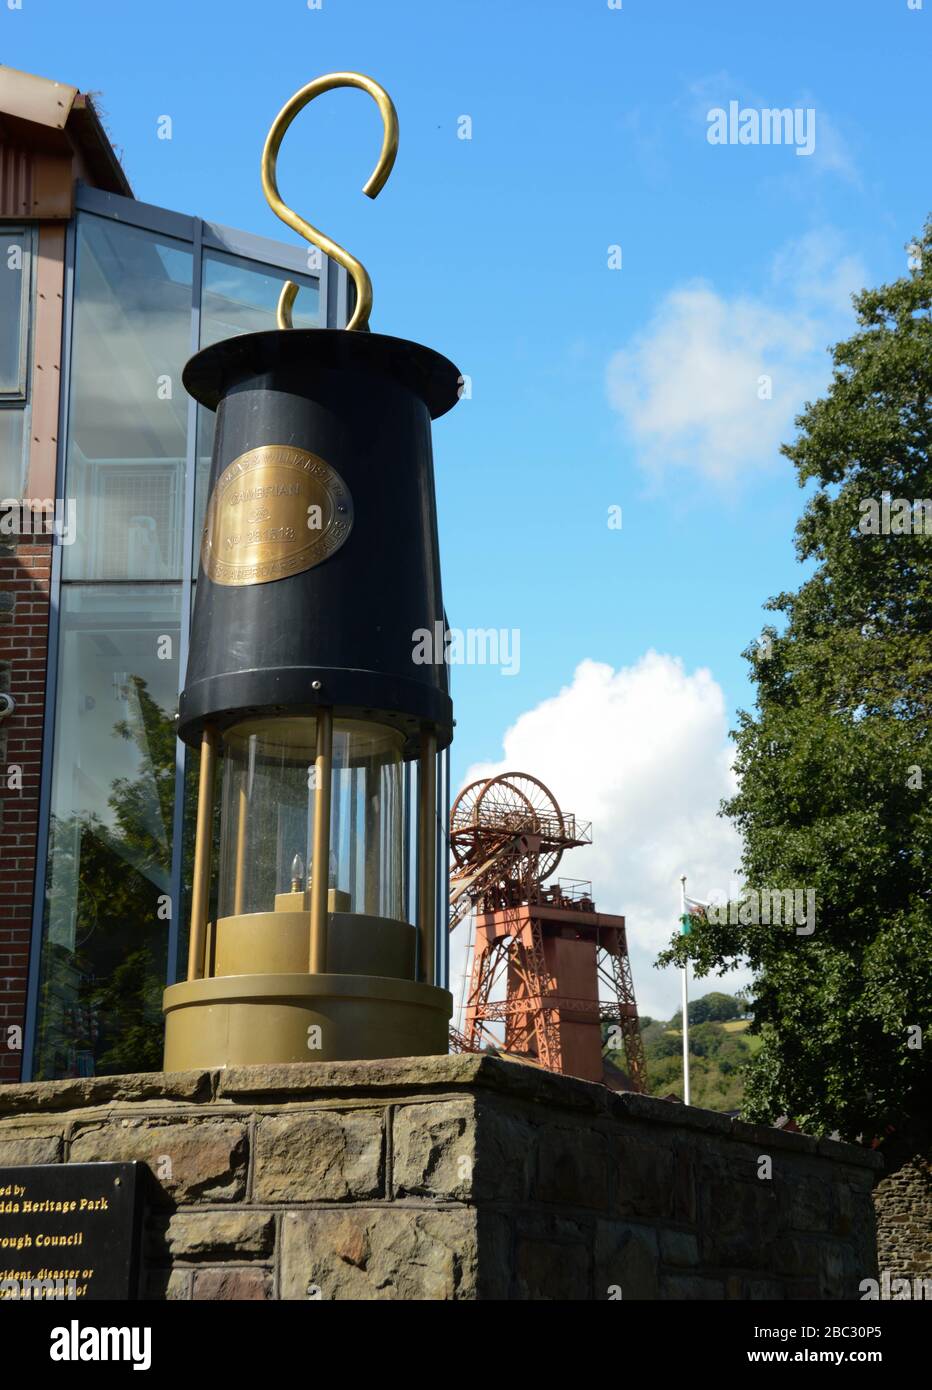 Porth, Wales - September 2017: A large scale reproduction of a traditional miner's lamp at the entrance to the Rhondda Heritage Park, Stock Photo